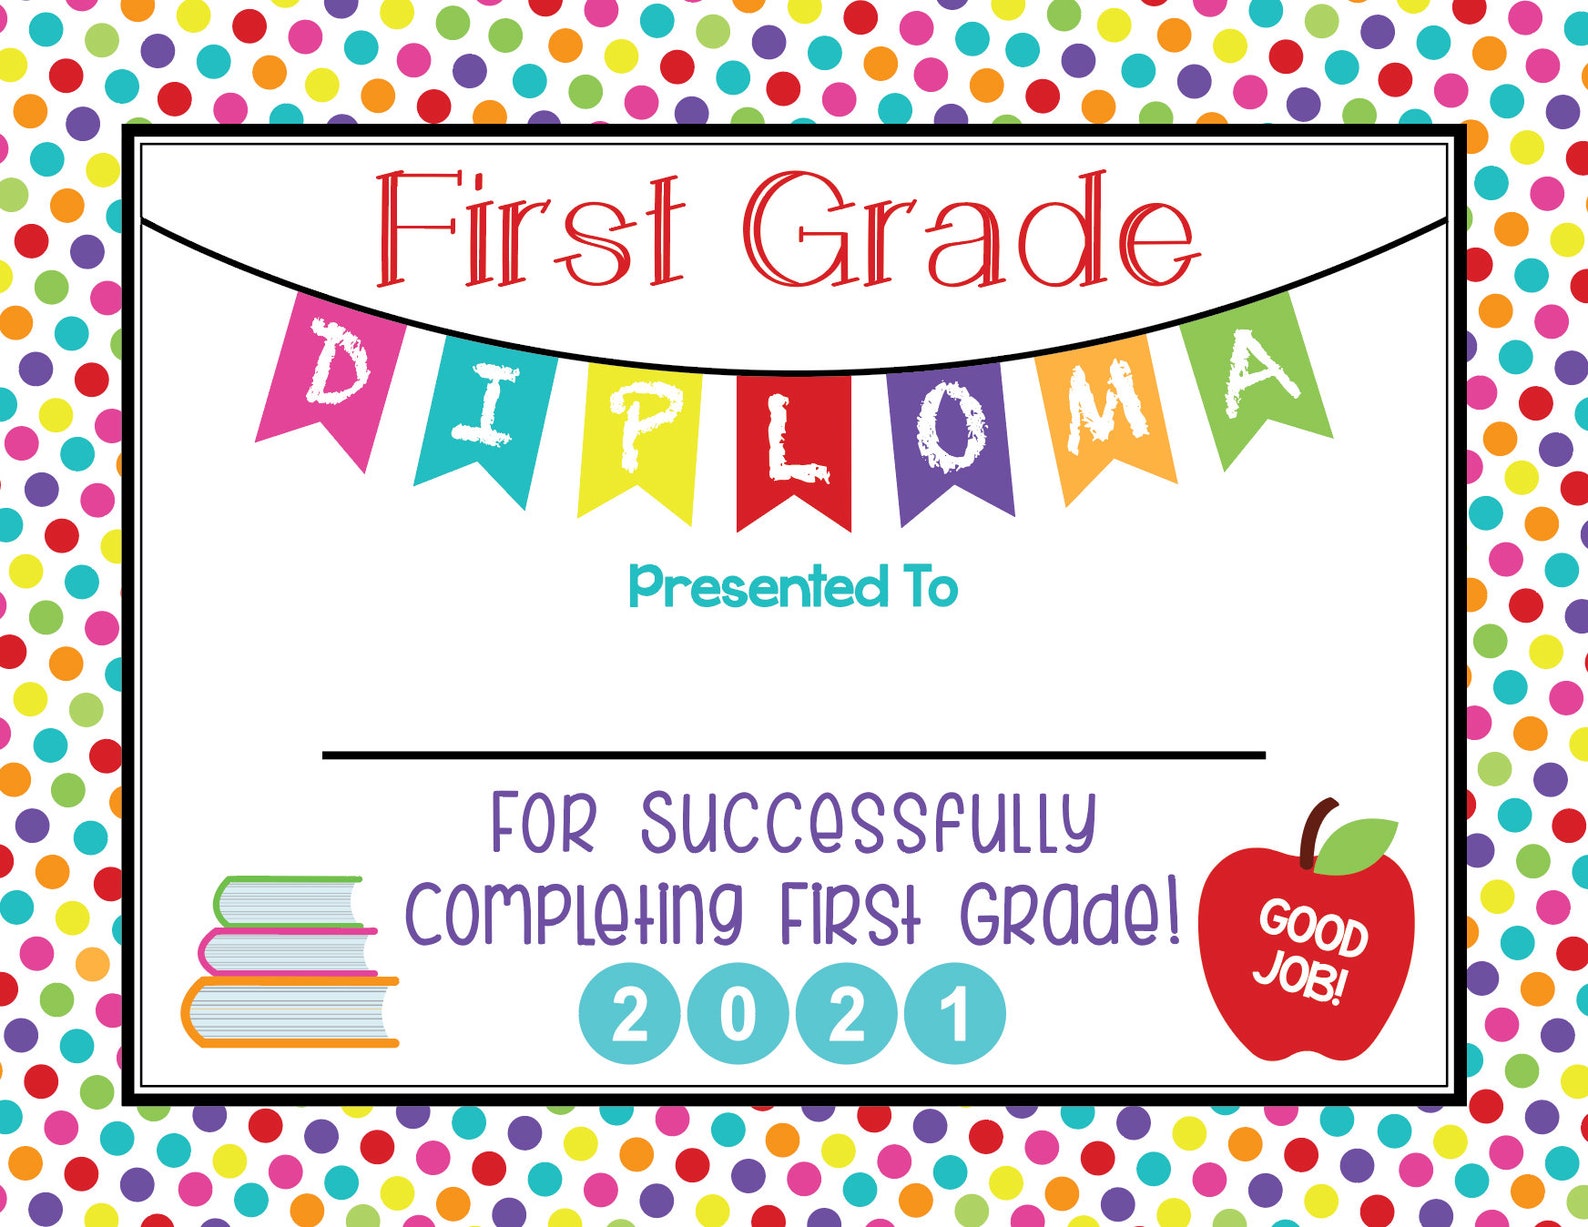 printable-first-grade-diploma-2021-pdf-file-only-school-etsy